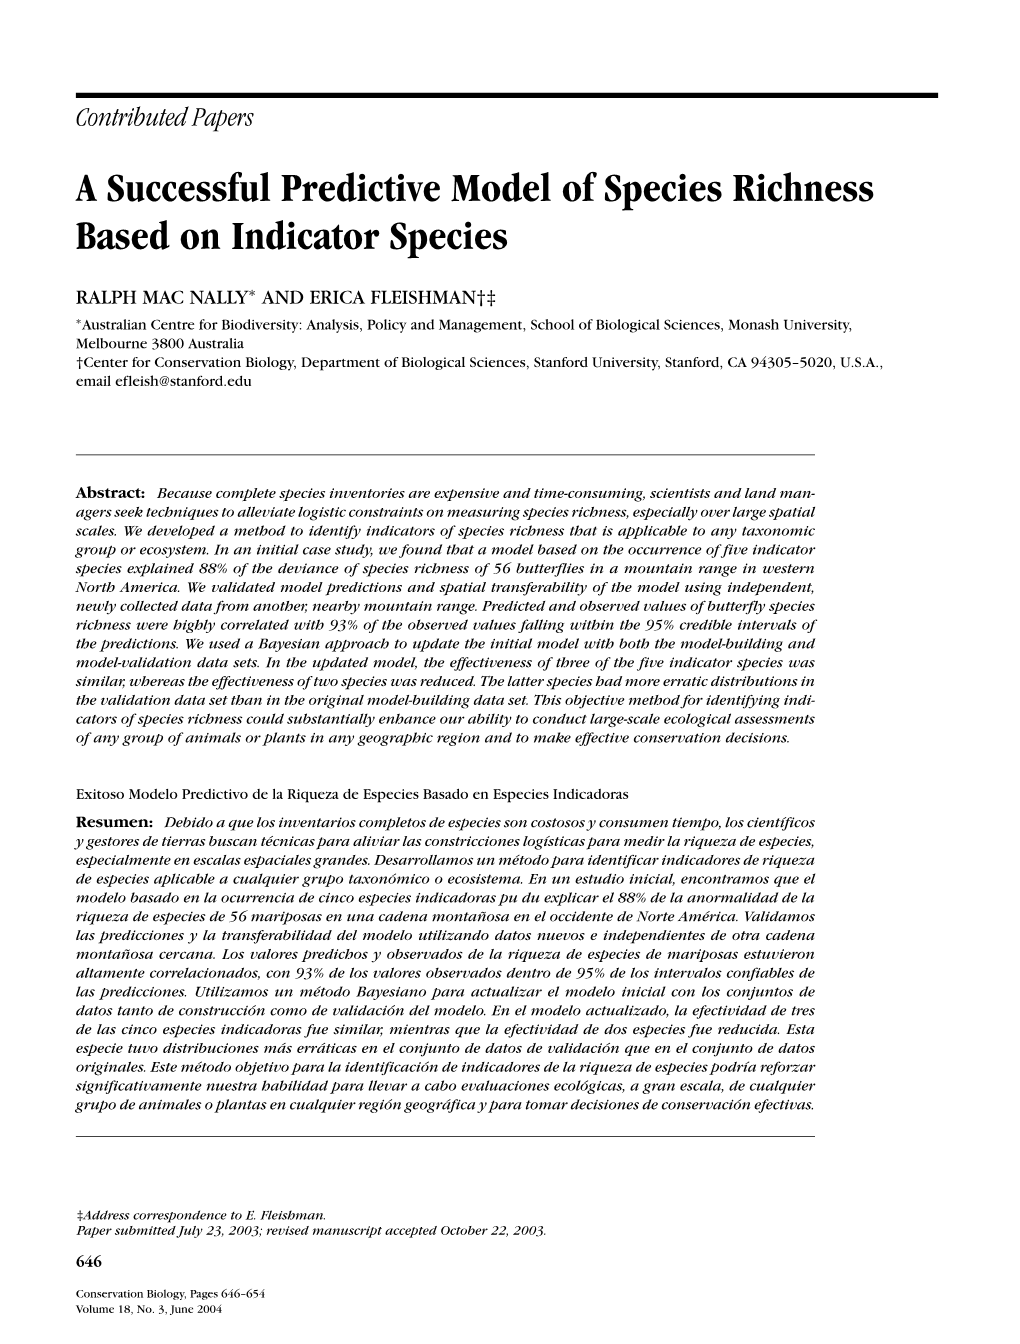 A Successful Predictive Model of Species Richness Based on Indicator Species